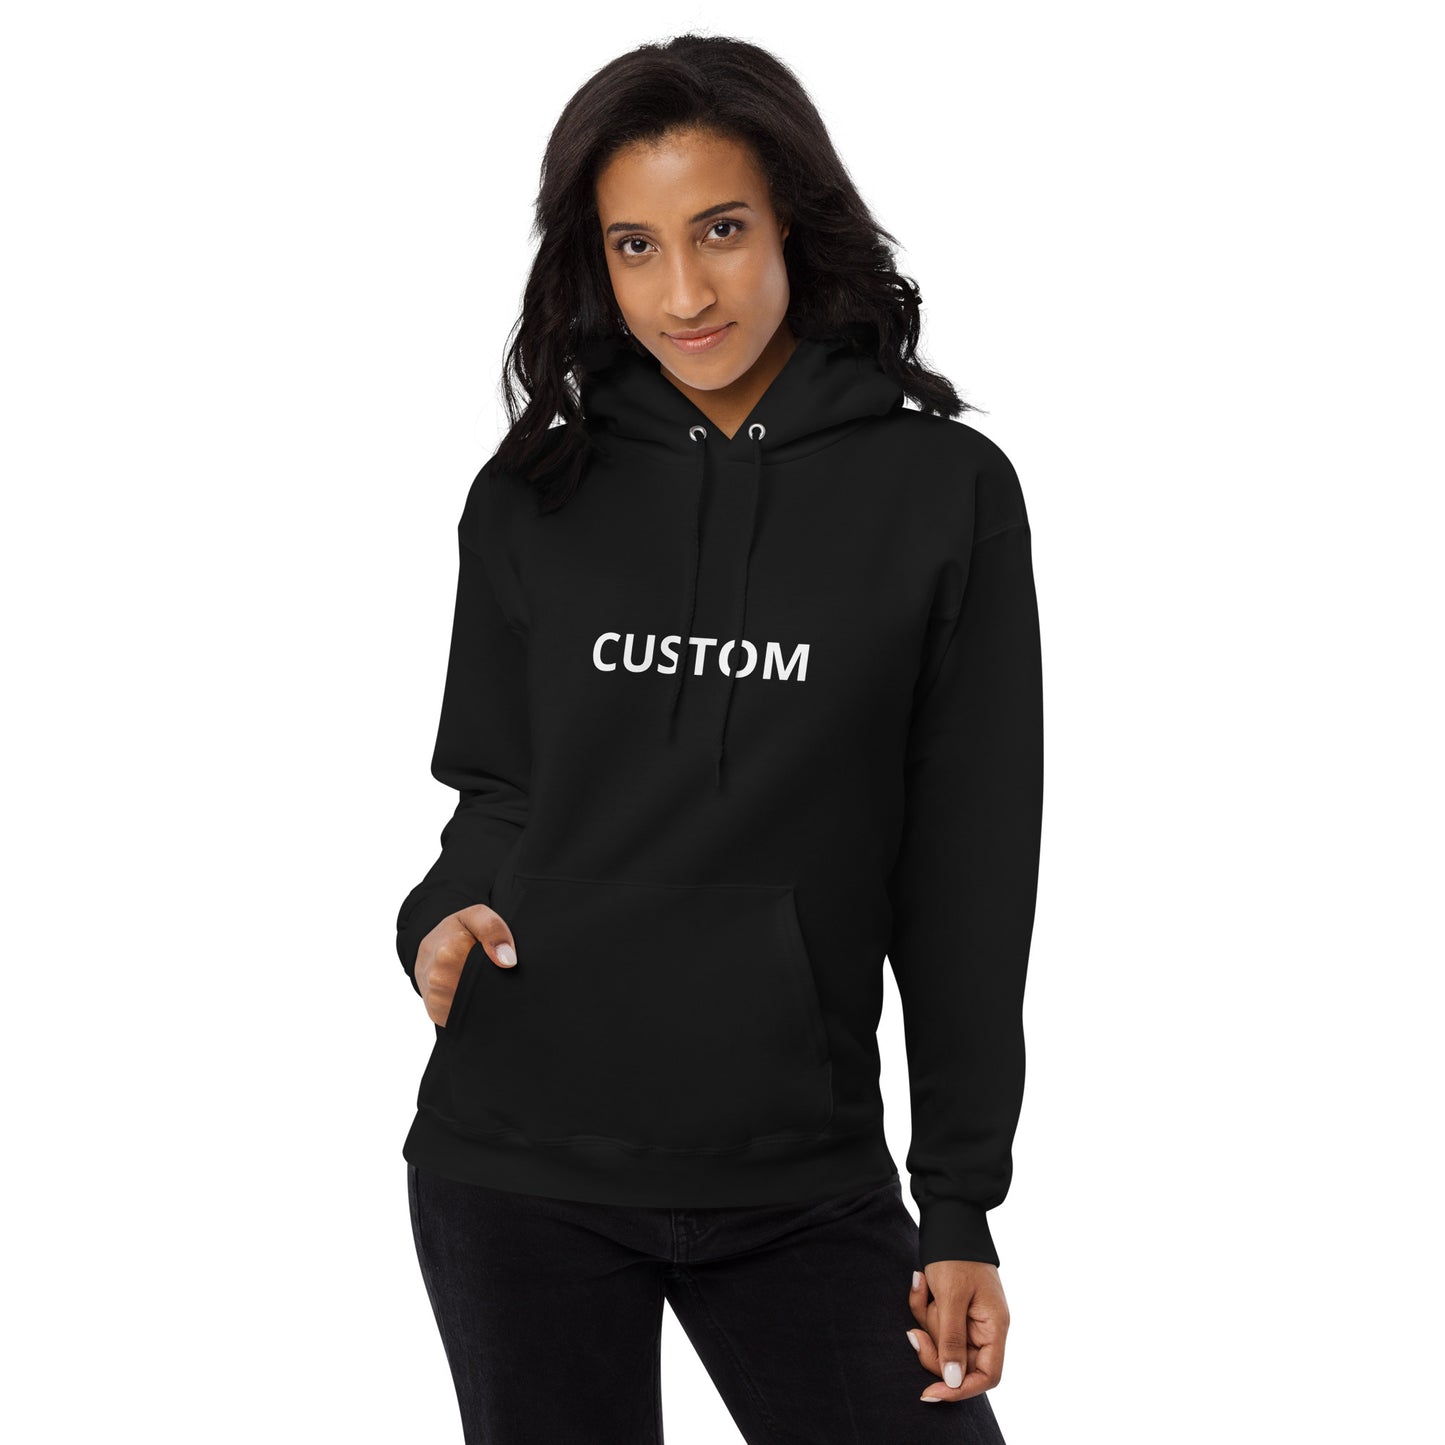 Customize Your hoodie